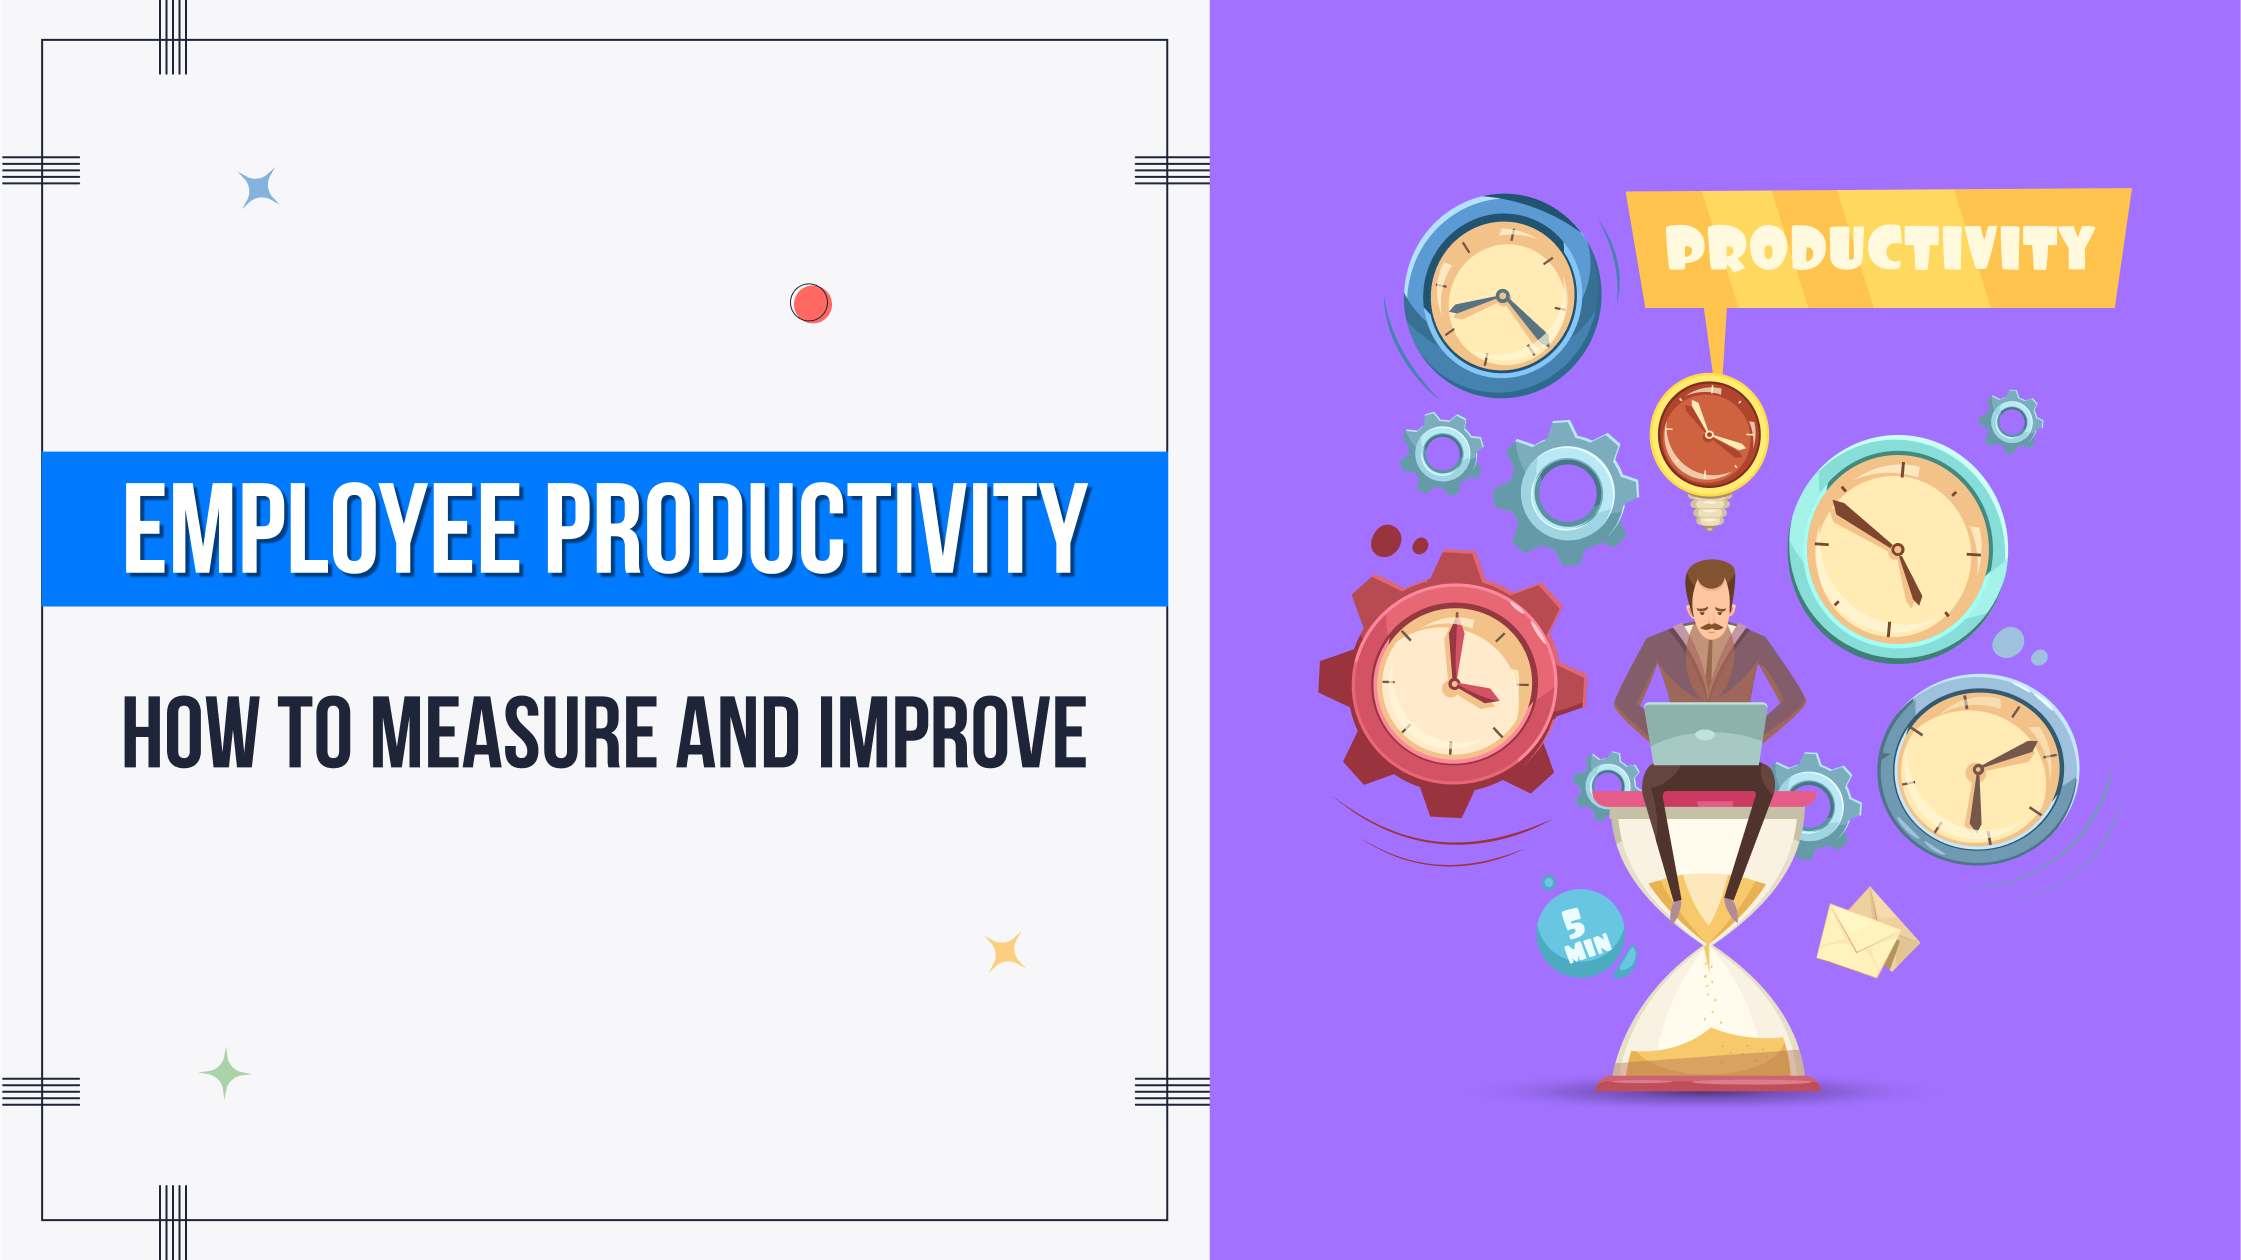 Employee Productivity How to Measure and Improve